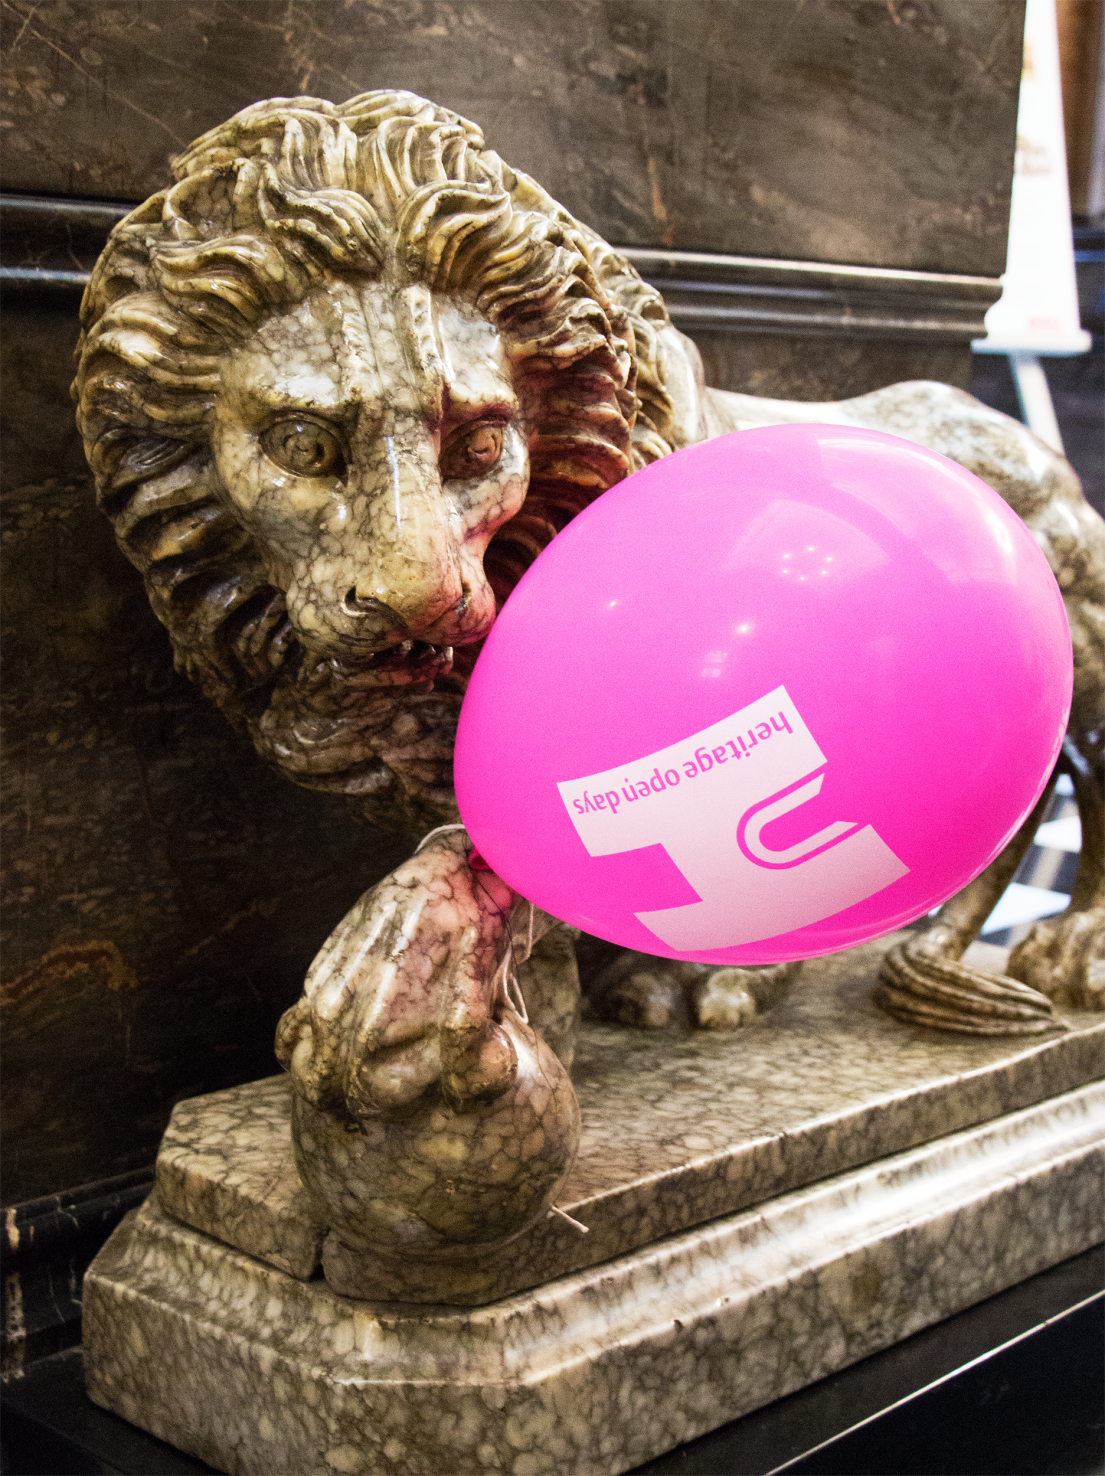 A stone carving of a lion which has had a pink balloon placed near its paws to it appears to be holding the balloon